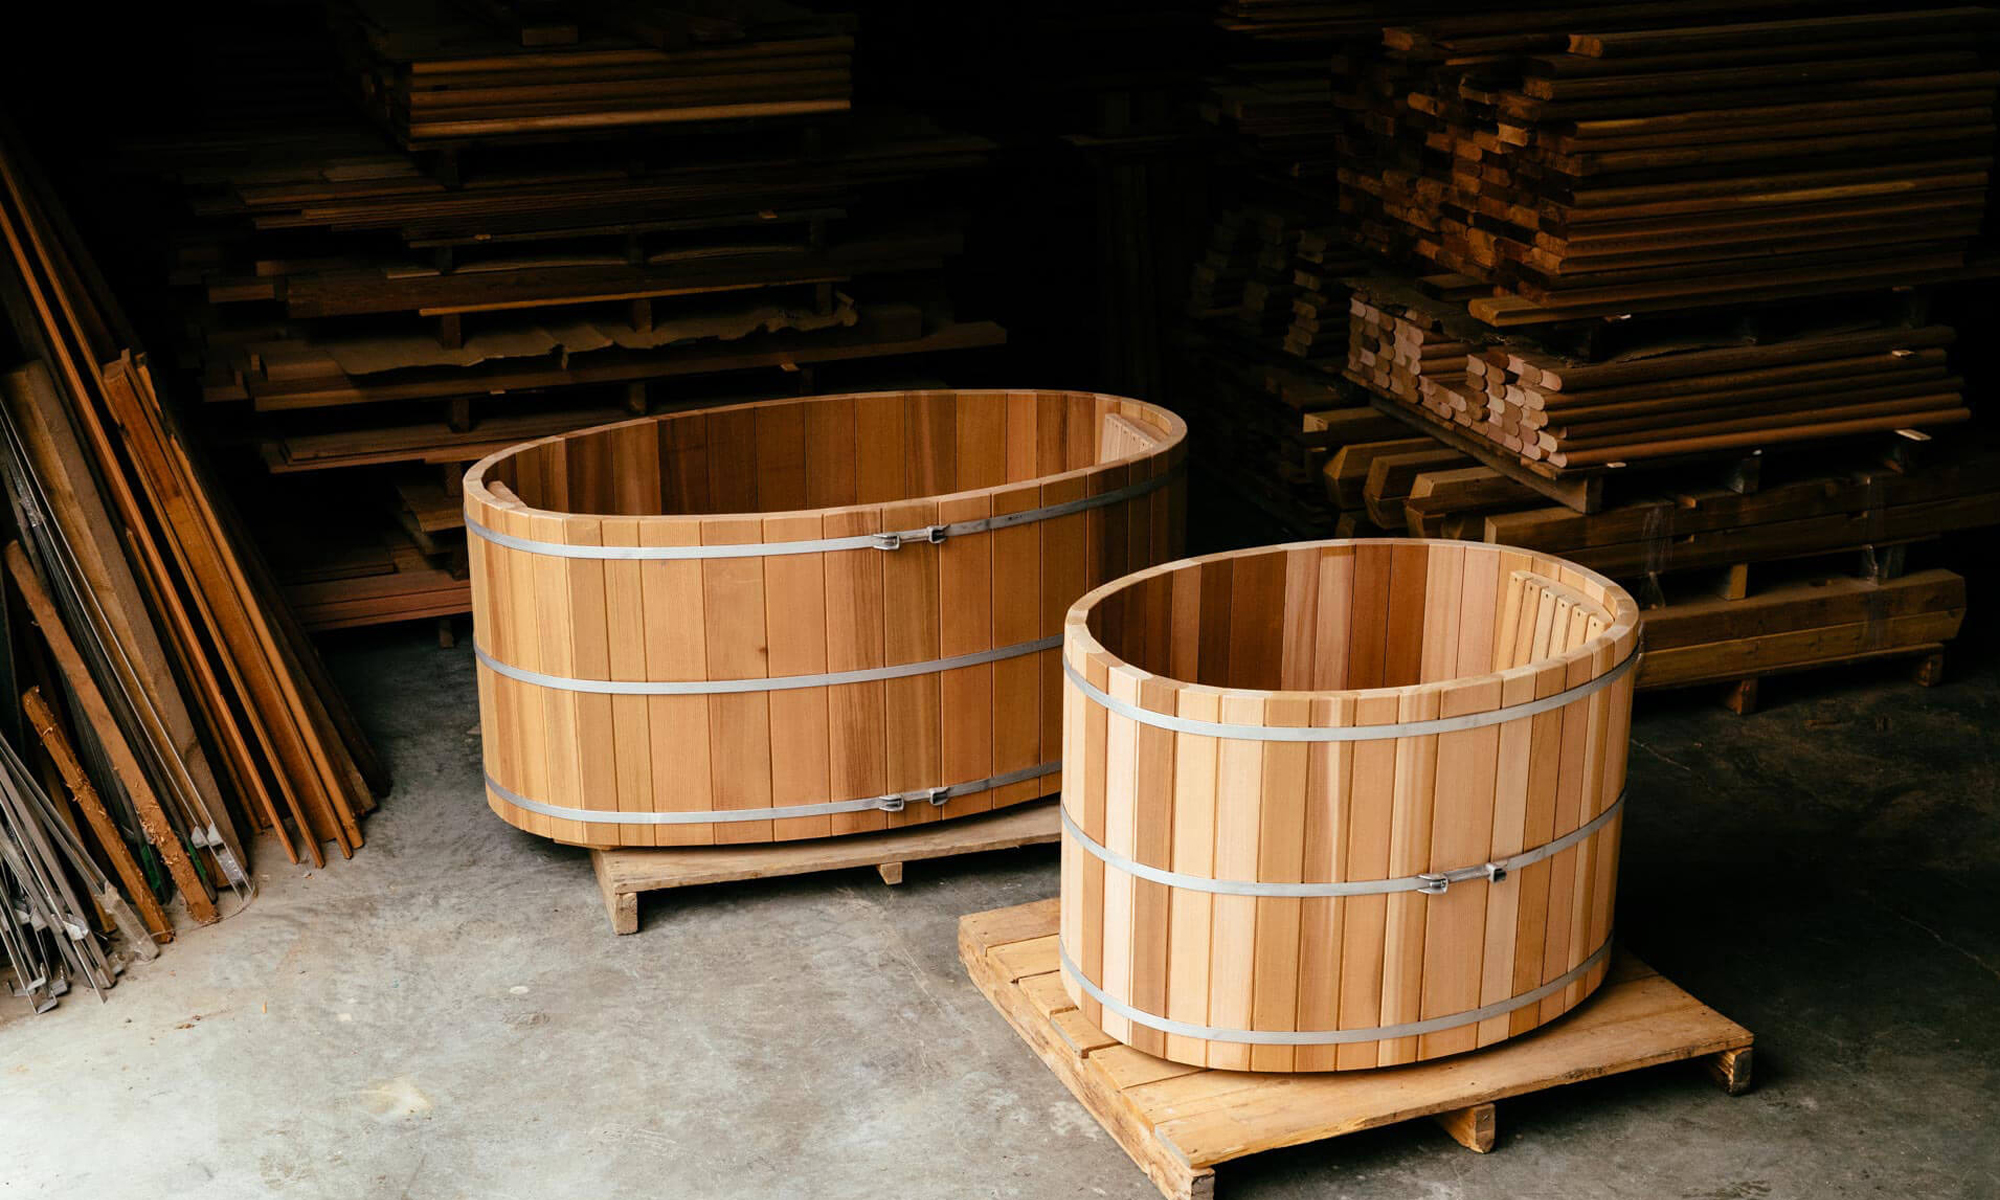 Wood Fired Hot Tub Designs to Relax in Style - Gessato